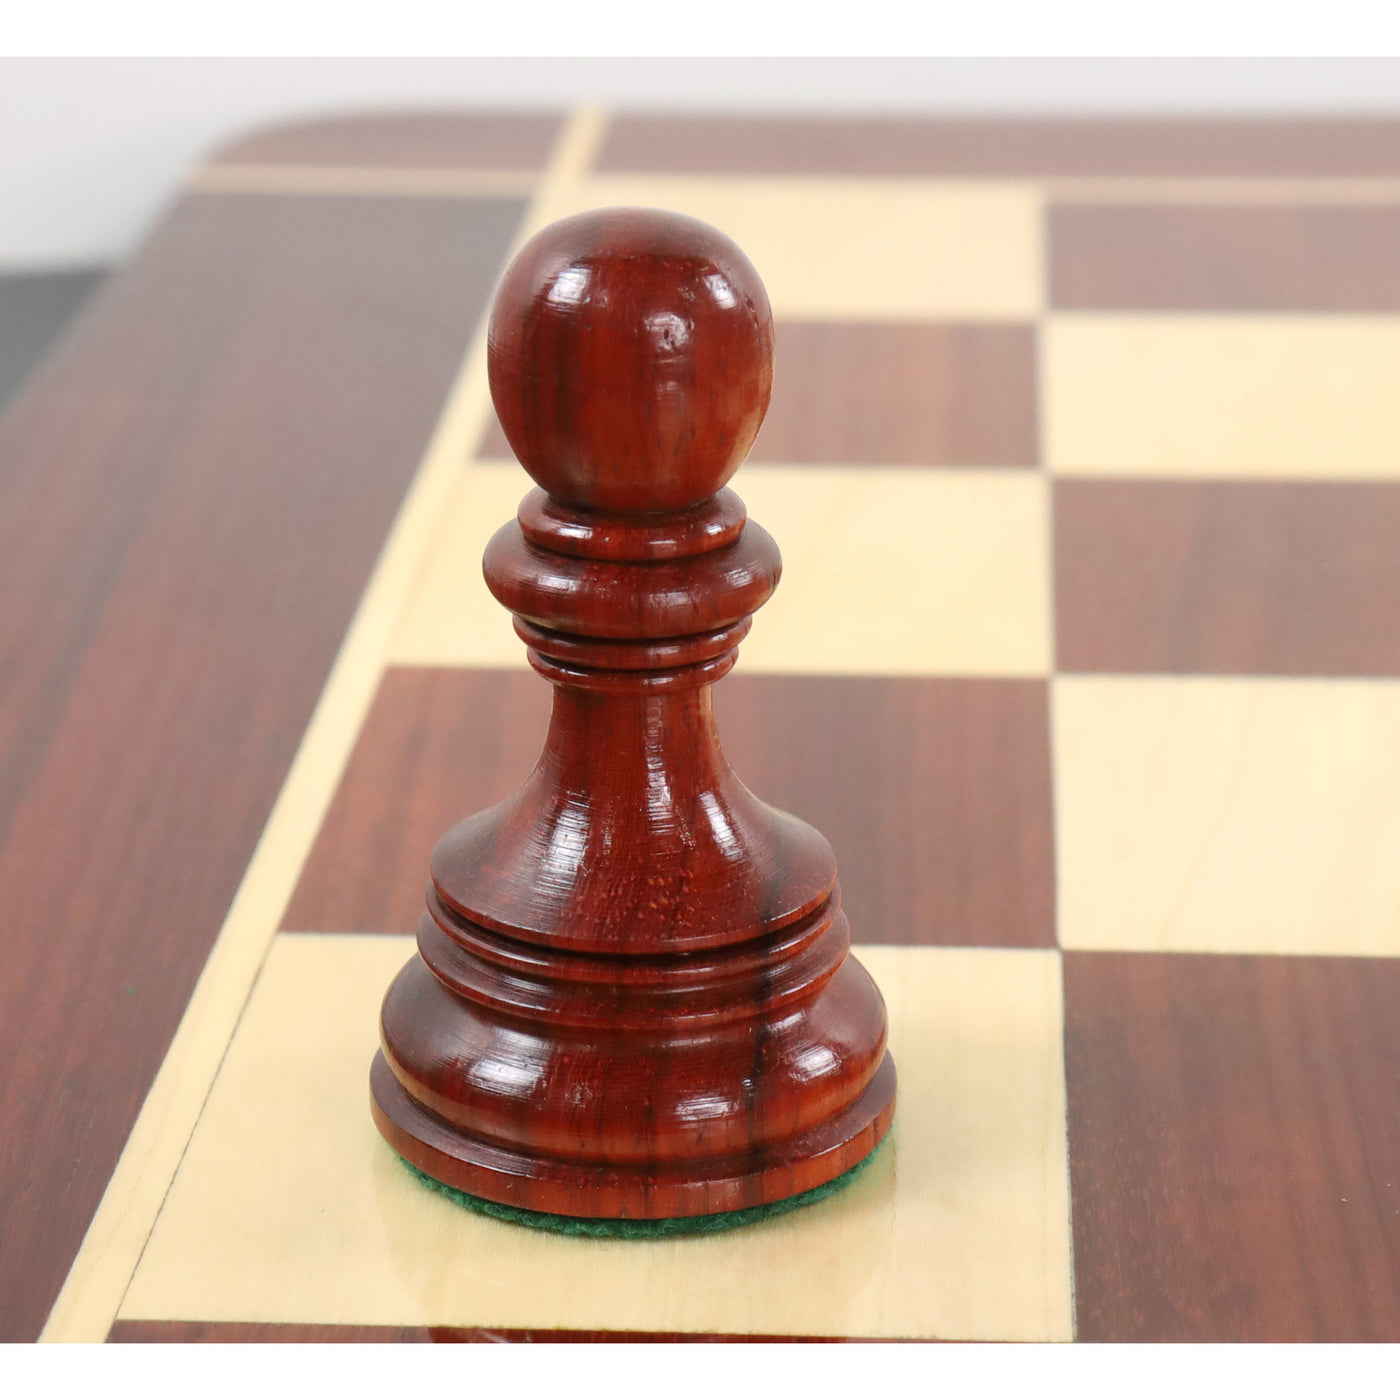 Combo of Alexandria Luxury Staunton Bud Rose Wood Chess Pieces with 23" Signature Wooden Chessboard and Leatherette Coffer Storage Box